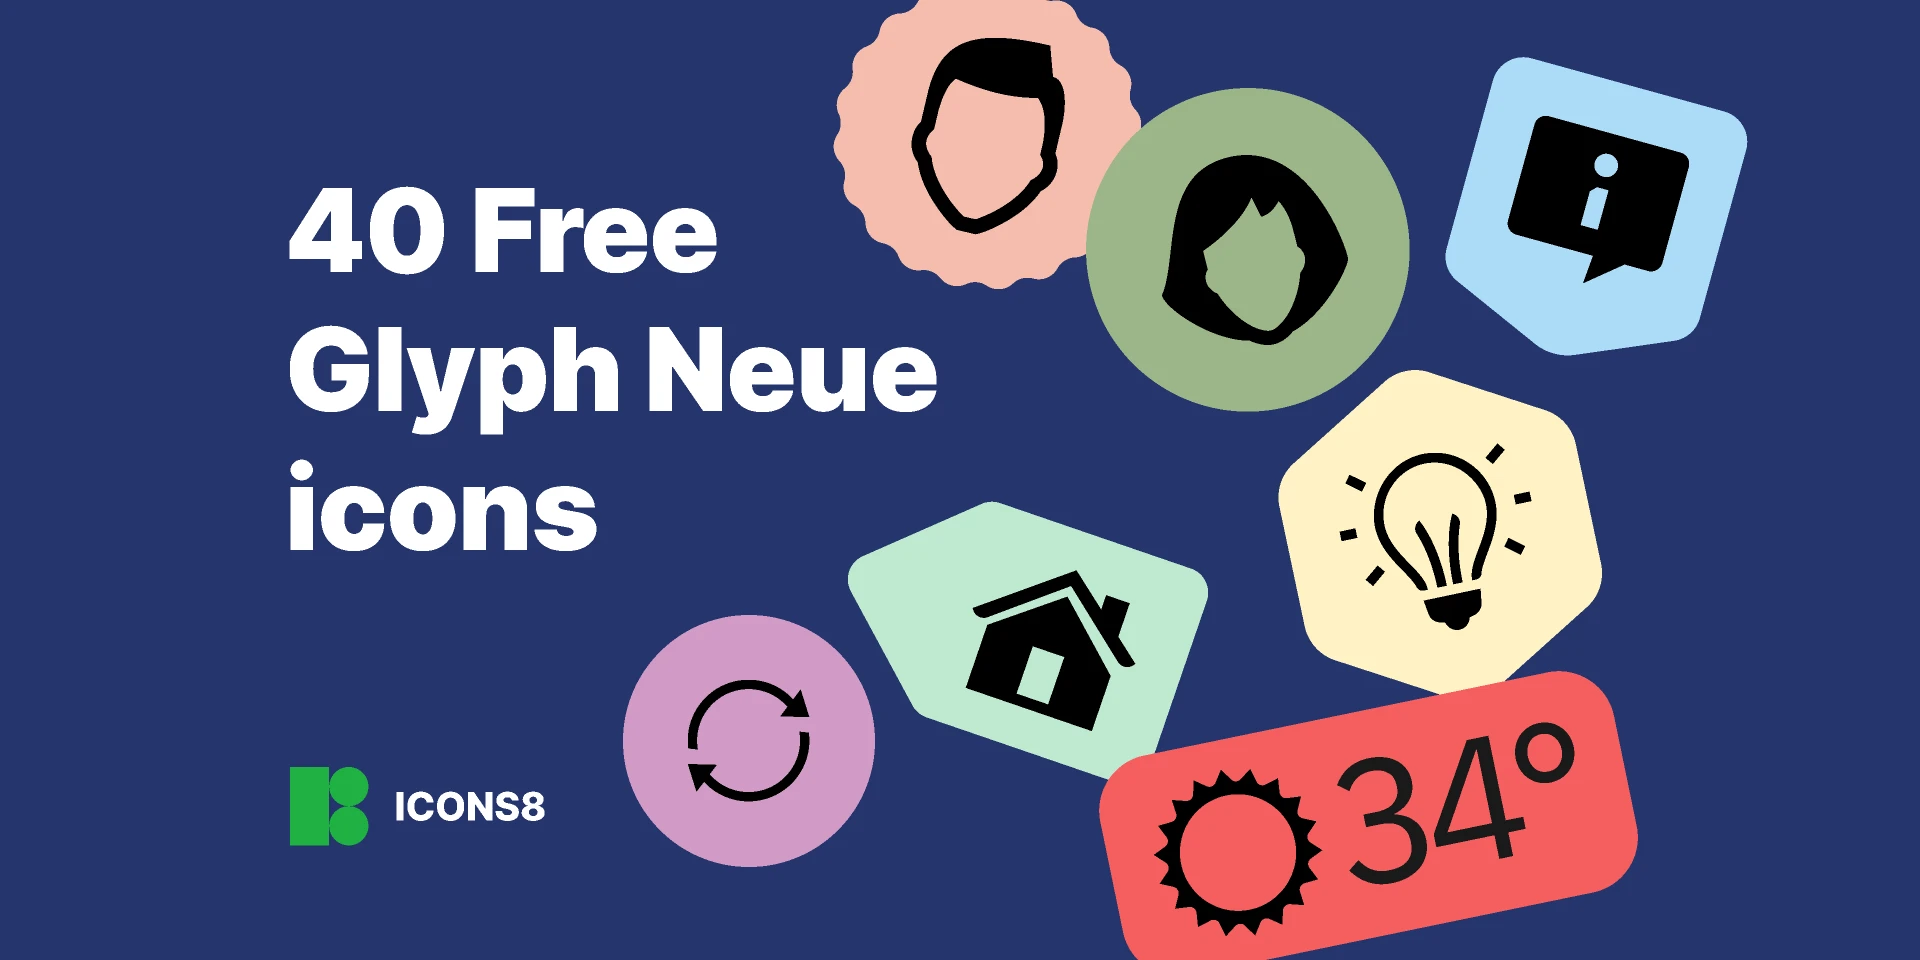 40 Free Glyph Neue icons for Figma and Adobe XD